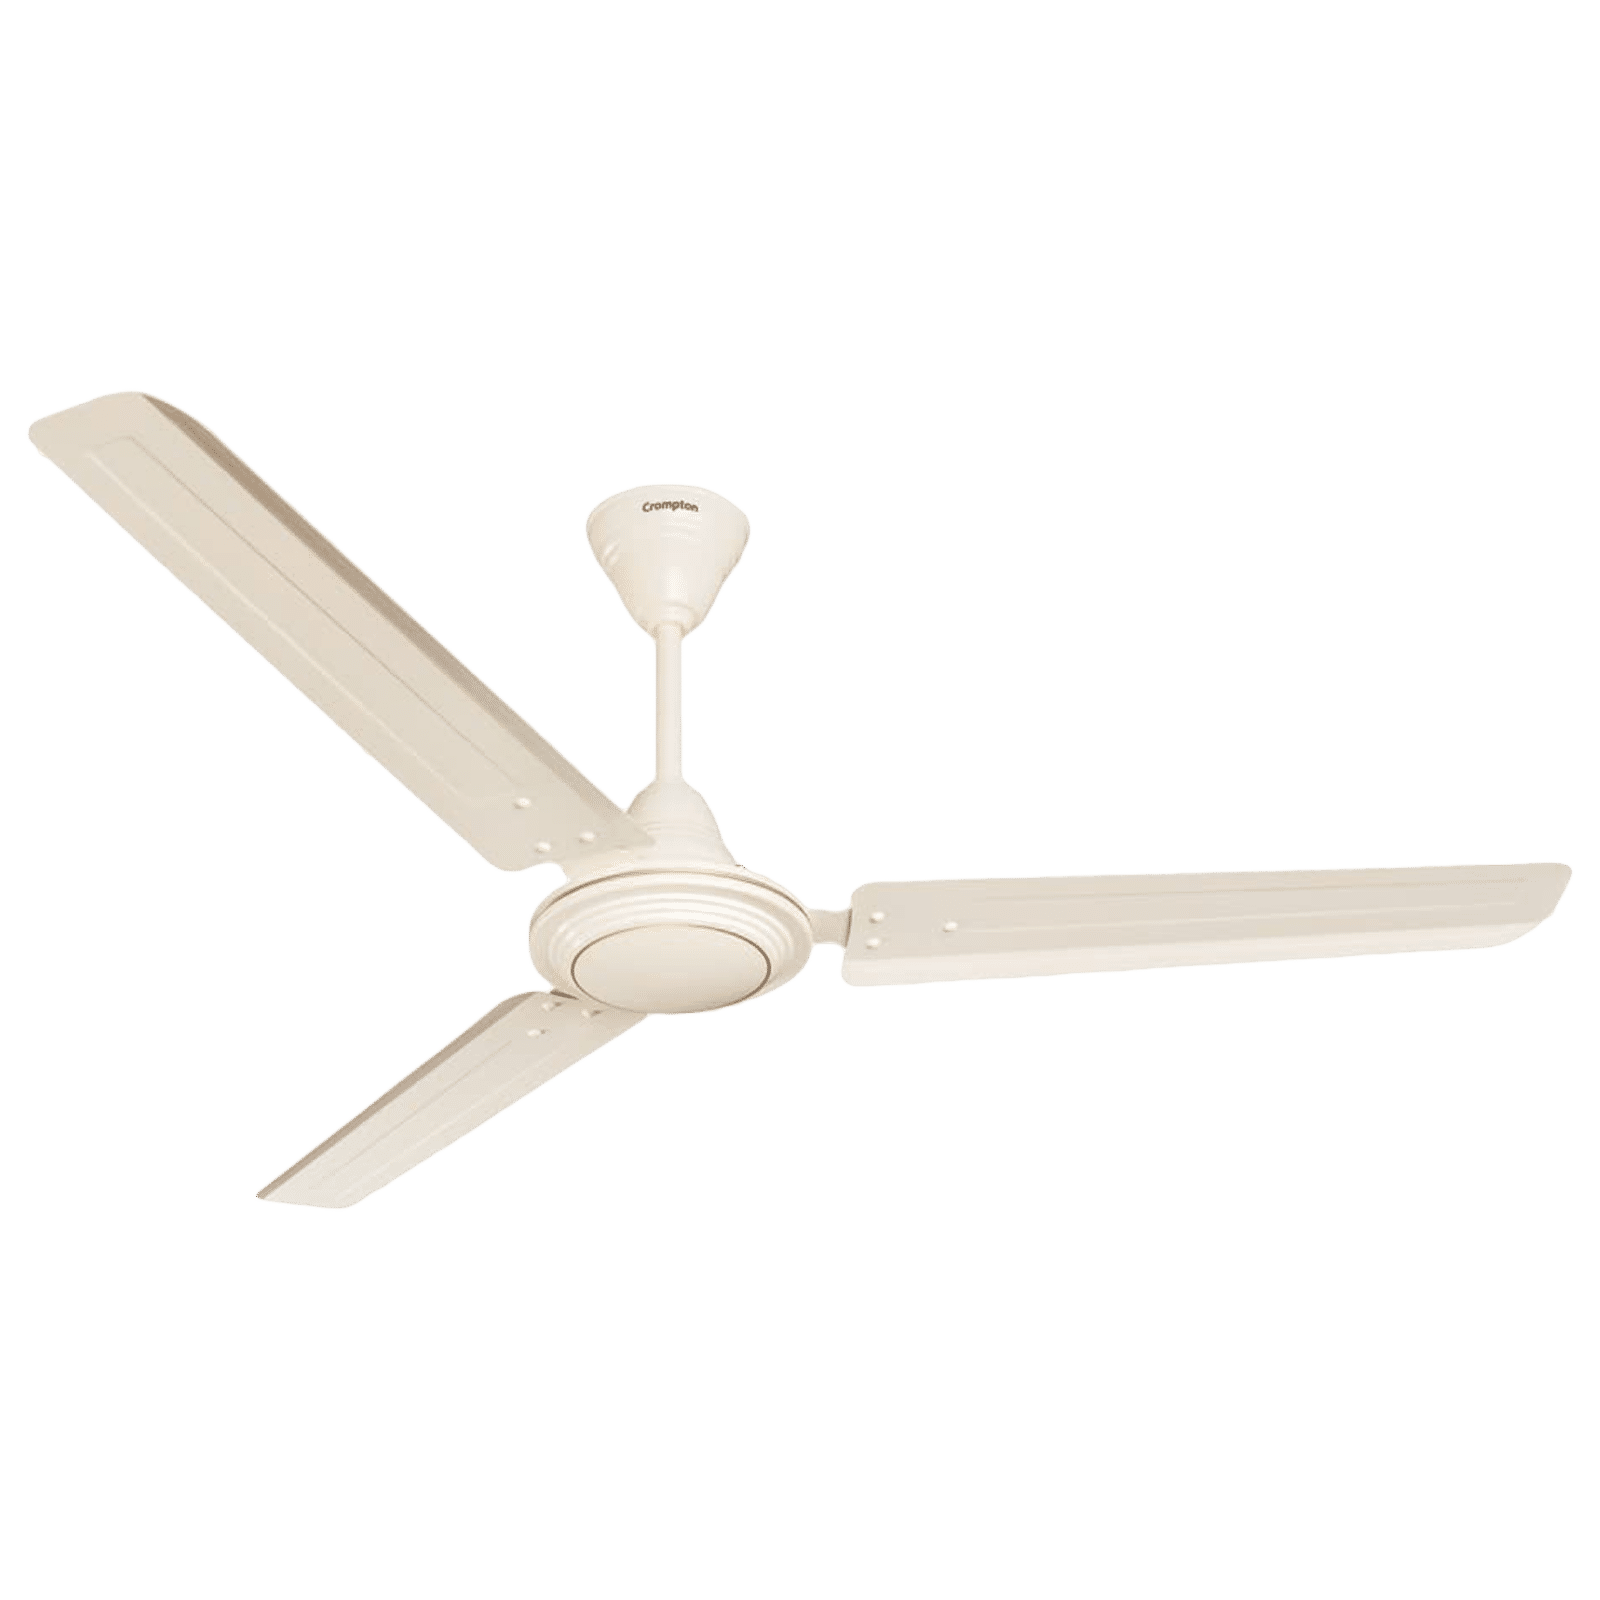 Crompton Aura 1200 mm (48 inch) High Speed Decorative Ceiling Fan (Ivory) -  LowestRate Shopping